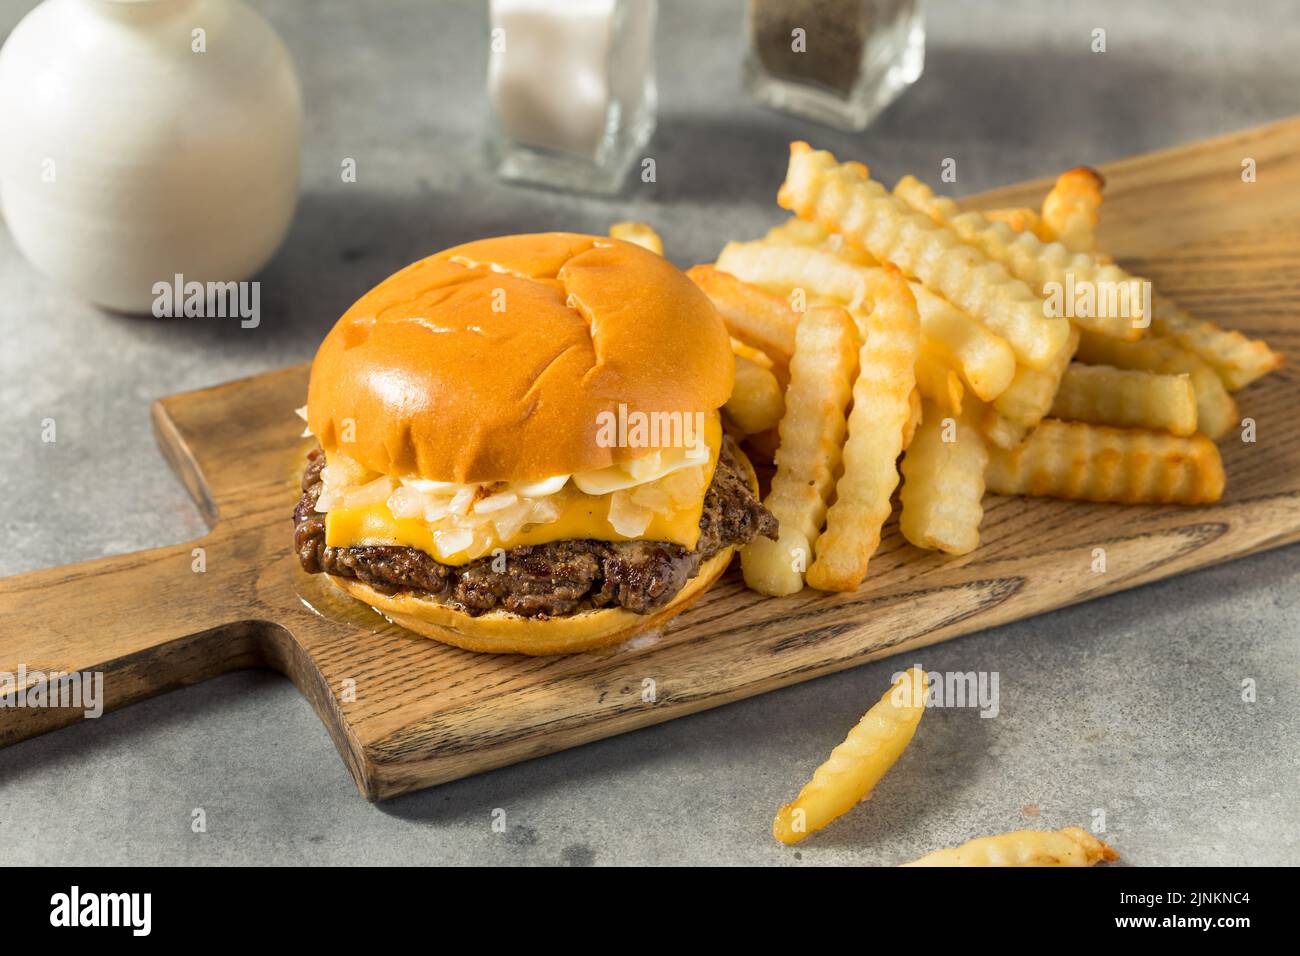 Homemade Wisconsin Butter Burger with Cheese and Fries Stock Photo